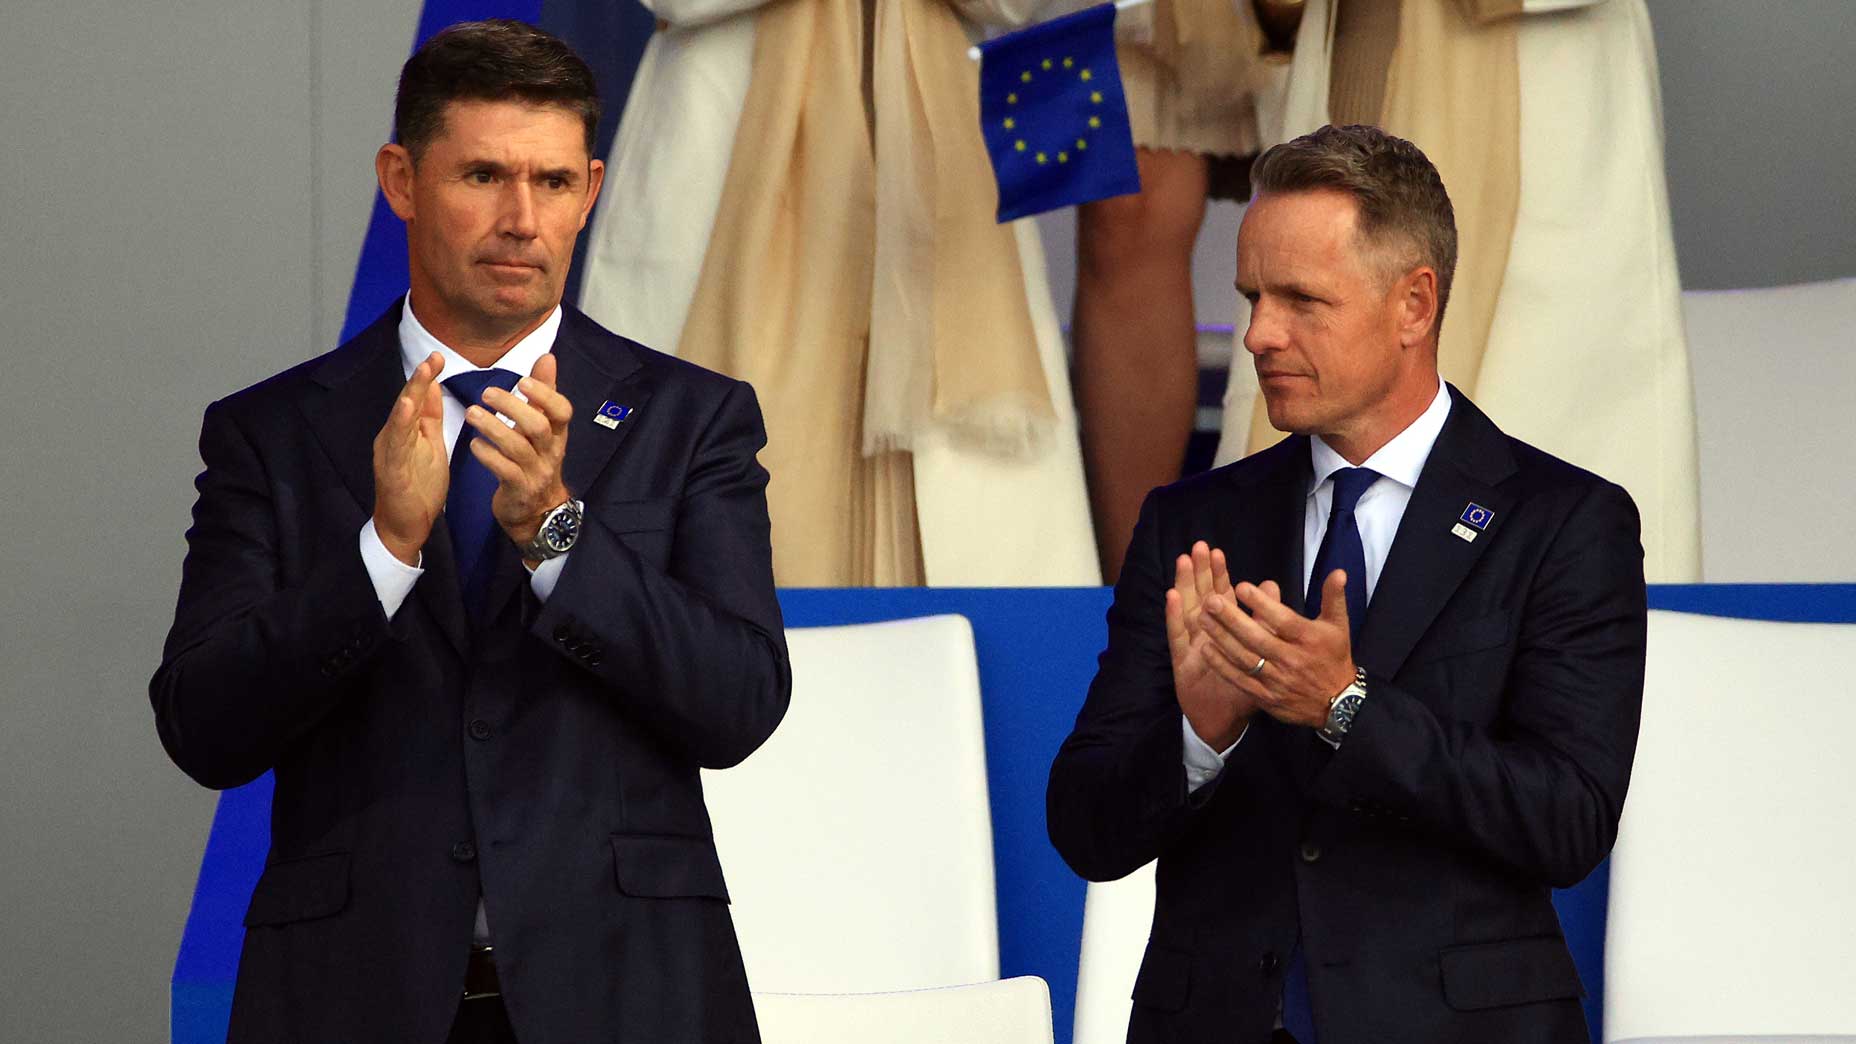 Luke Donald and Padriag Harrington at the 2021 Ryder Cup ceremony